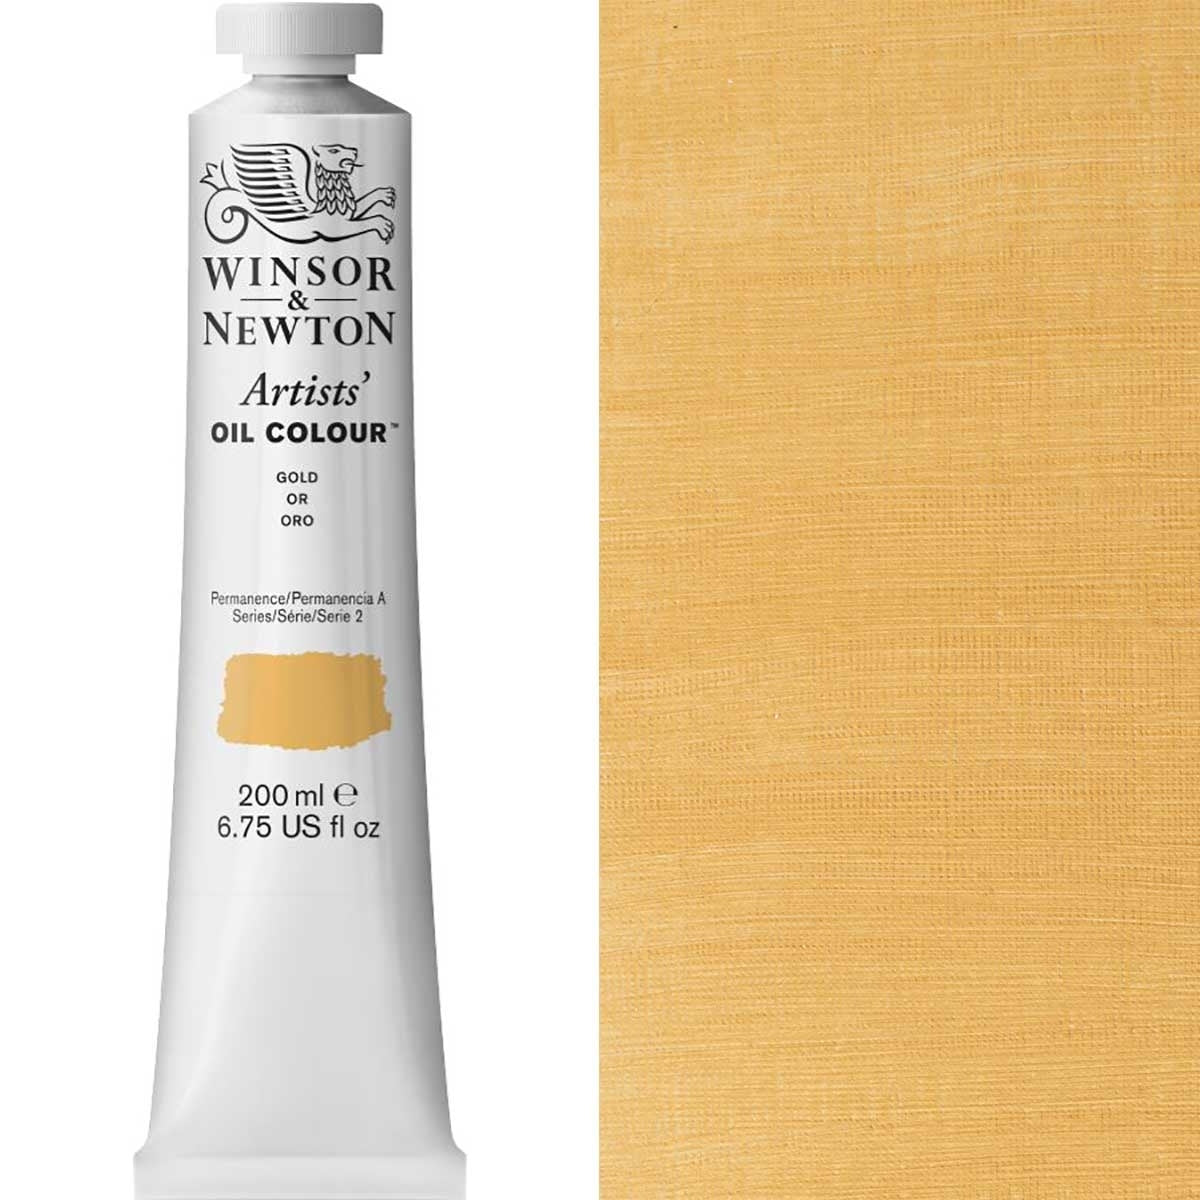 Winsor and Newton - Artists' Oil Colour - 200ml - Gold